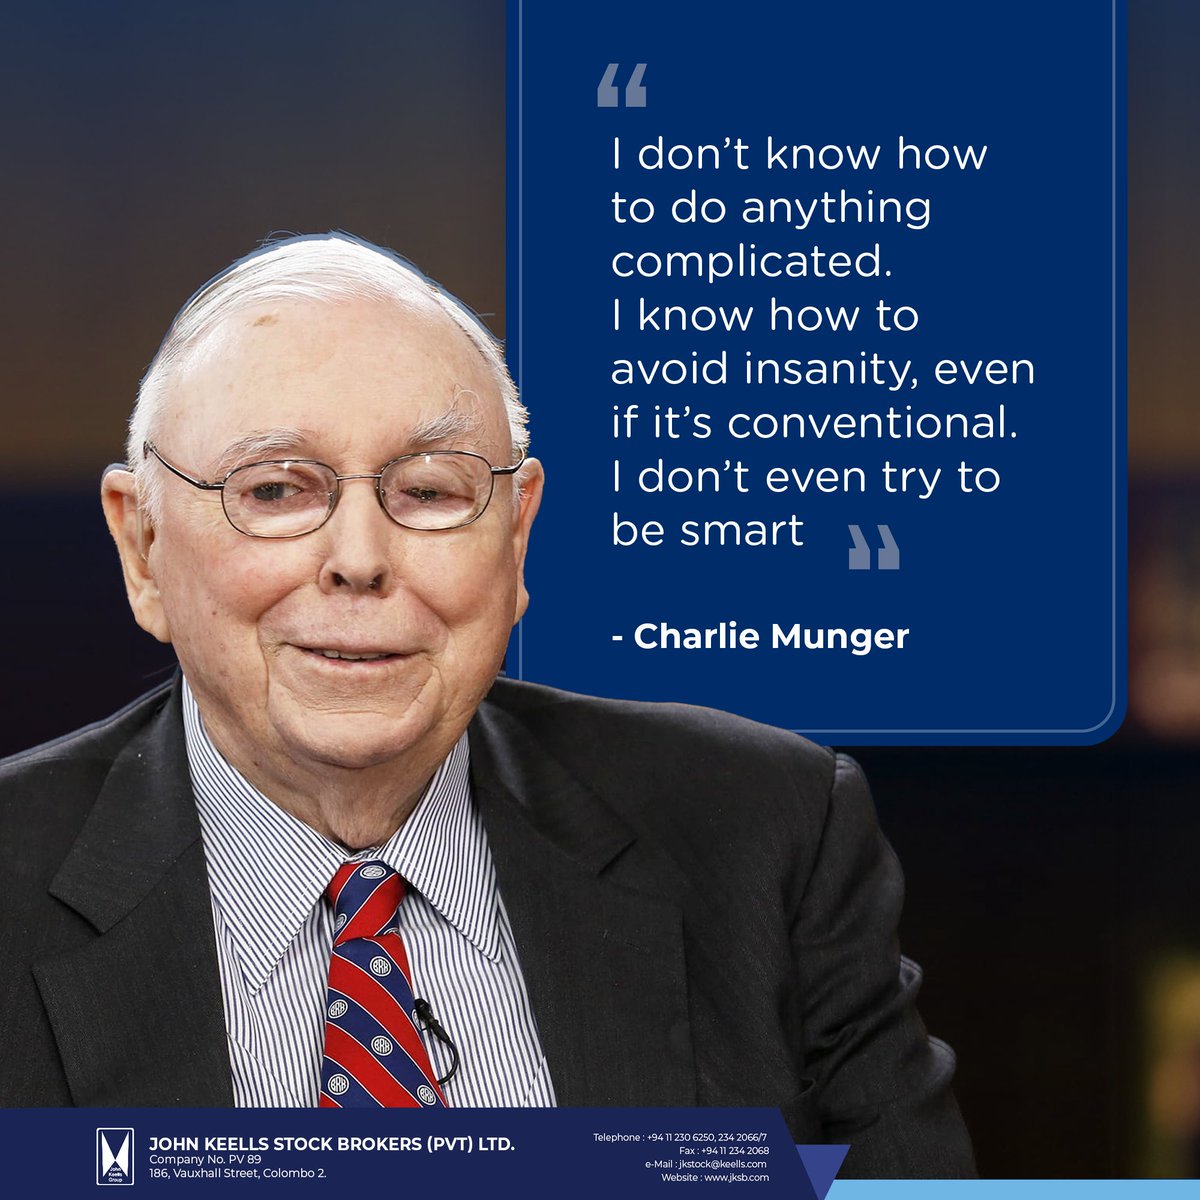 Channel the wisdom of Charlie Munger to cut through the noise of complexity. Embrace a straightforward path to financial wisdom and stability—simplicity is the ultimate sophistication in investing.

#CharlieMunger #InvestmentSimplicity #FinancialWisdom #ClearPathToSuccess